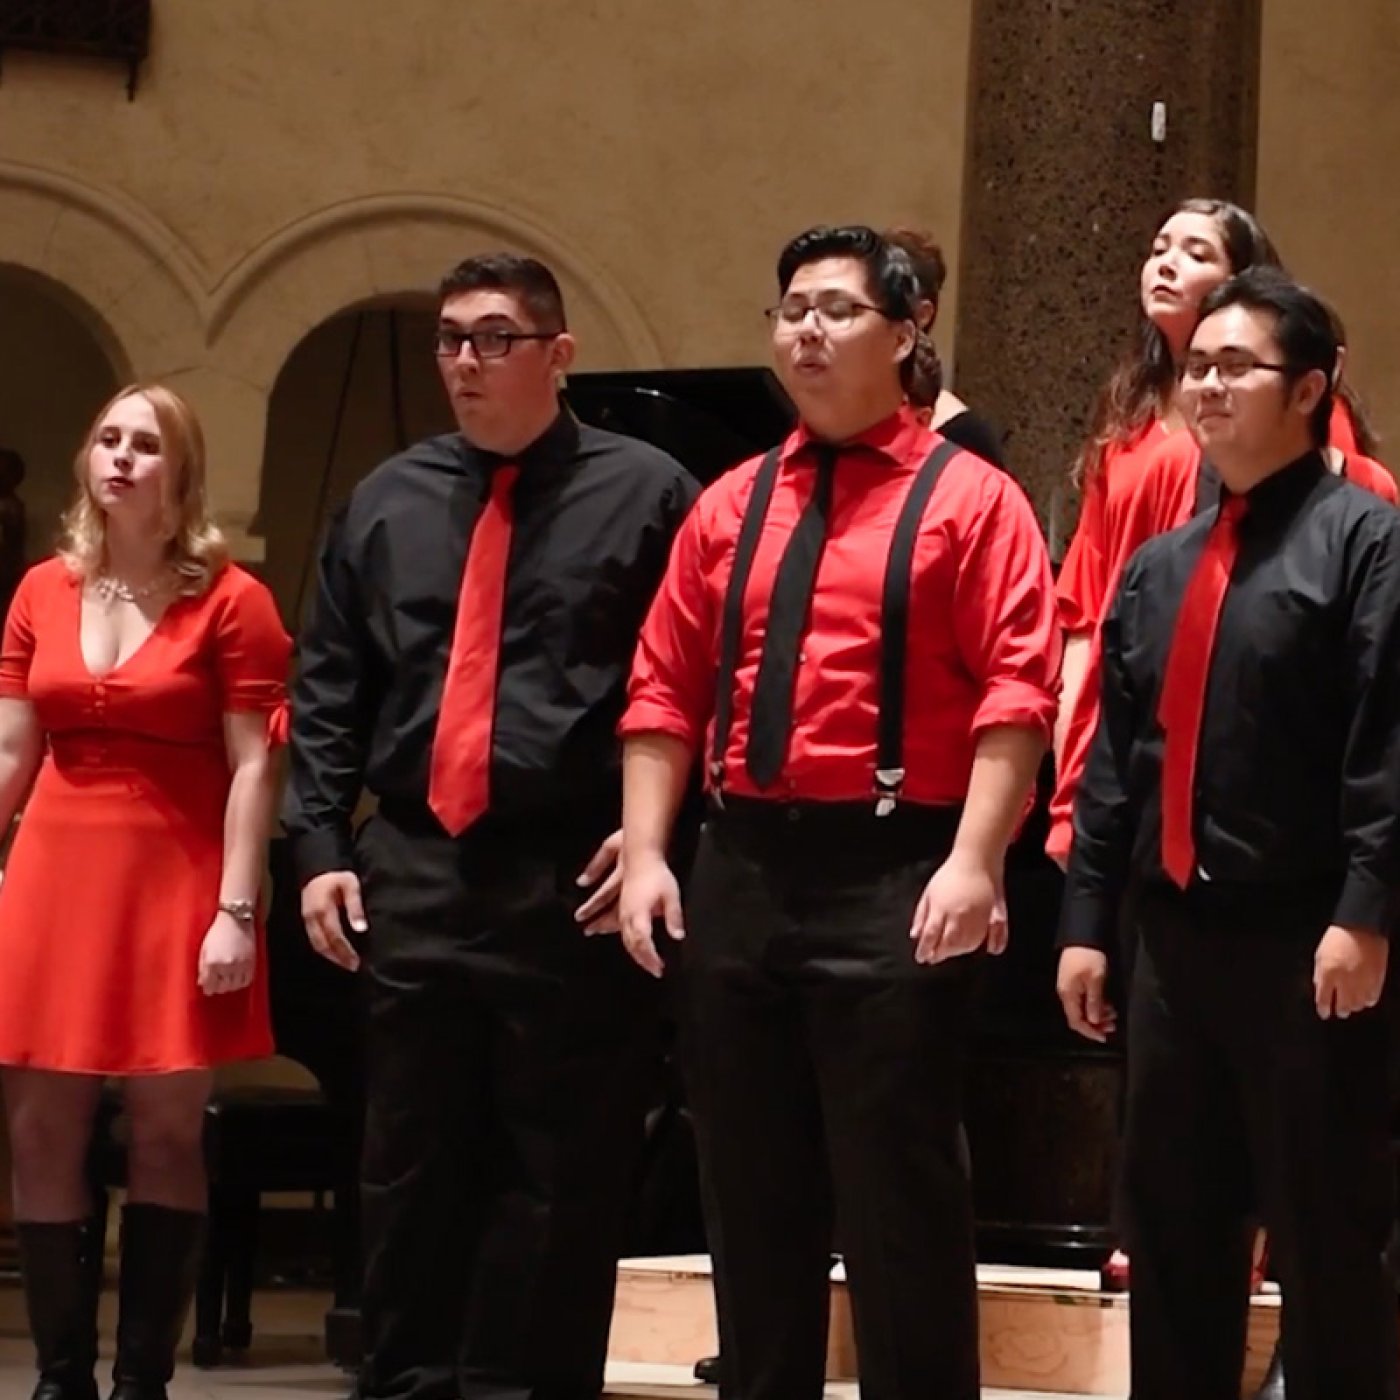 choir wearing black and red